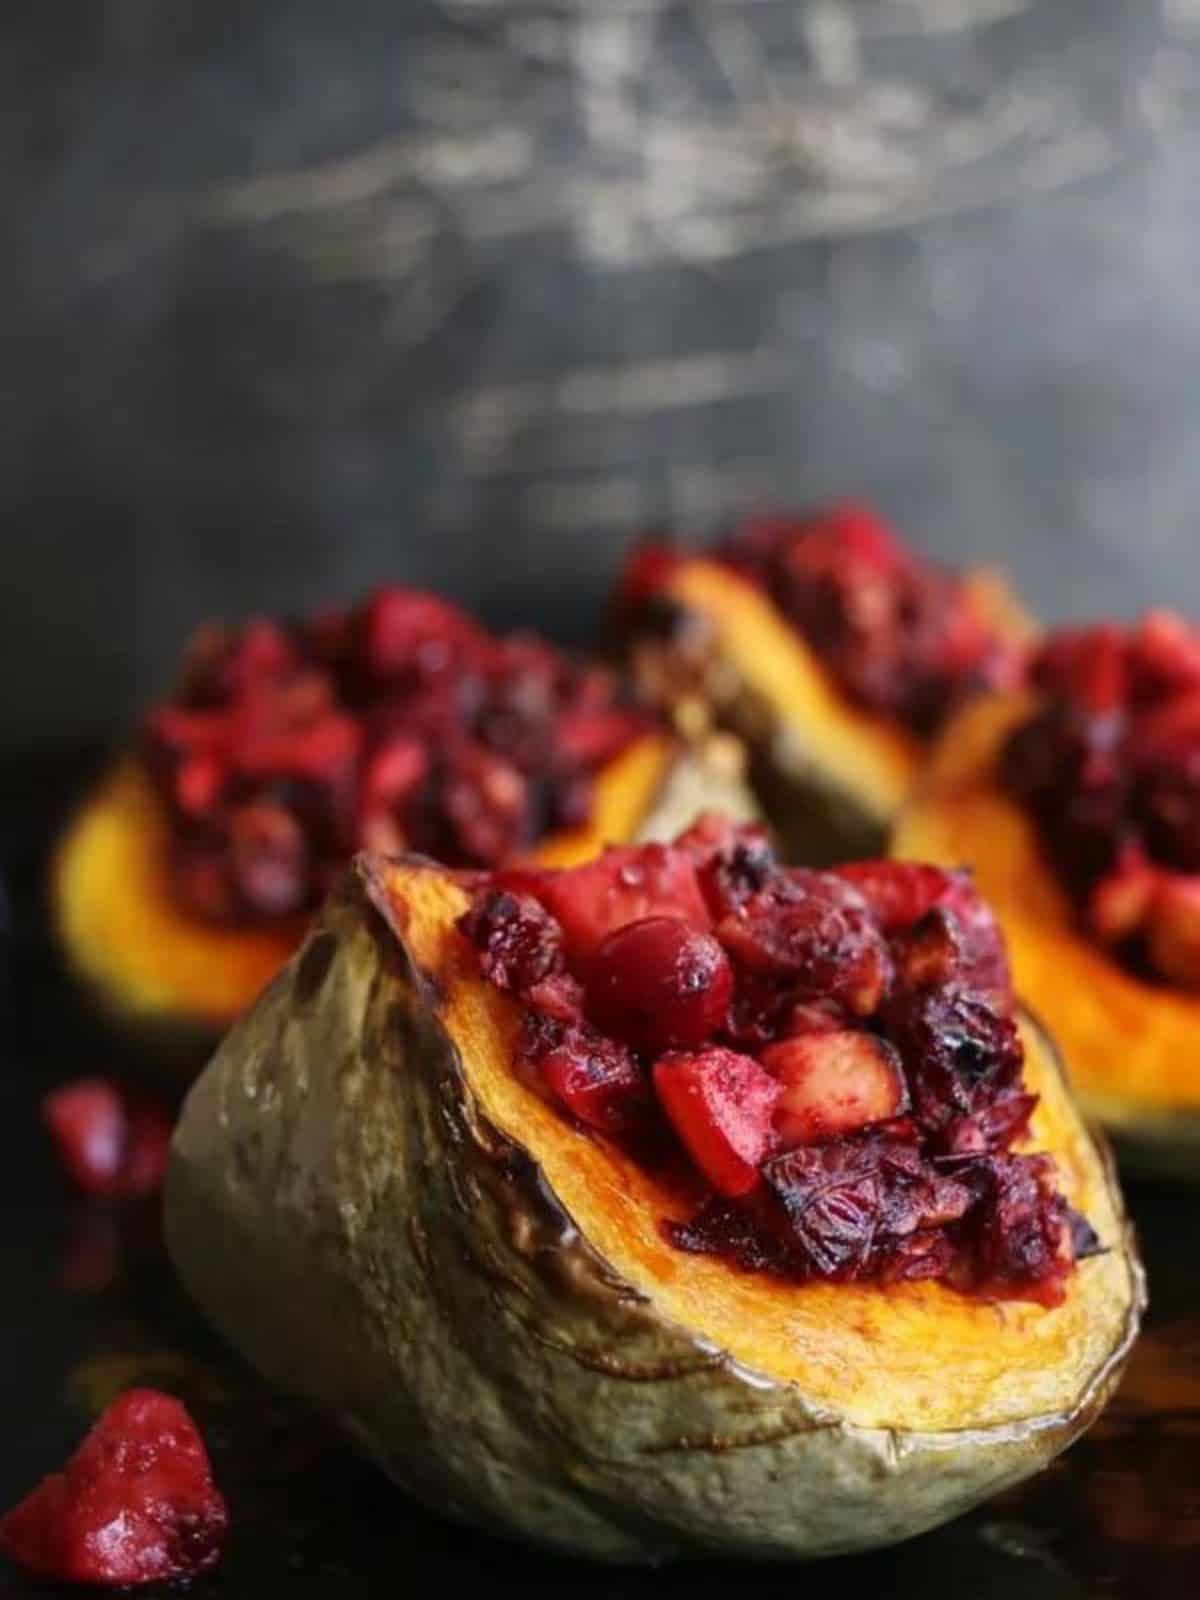 Baked squash stuffed with cranberries and apples. 